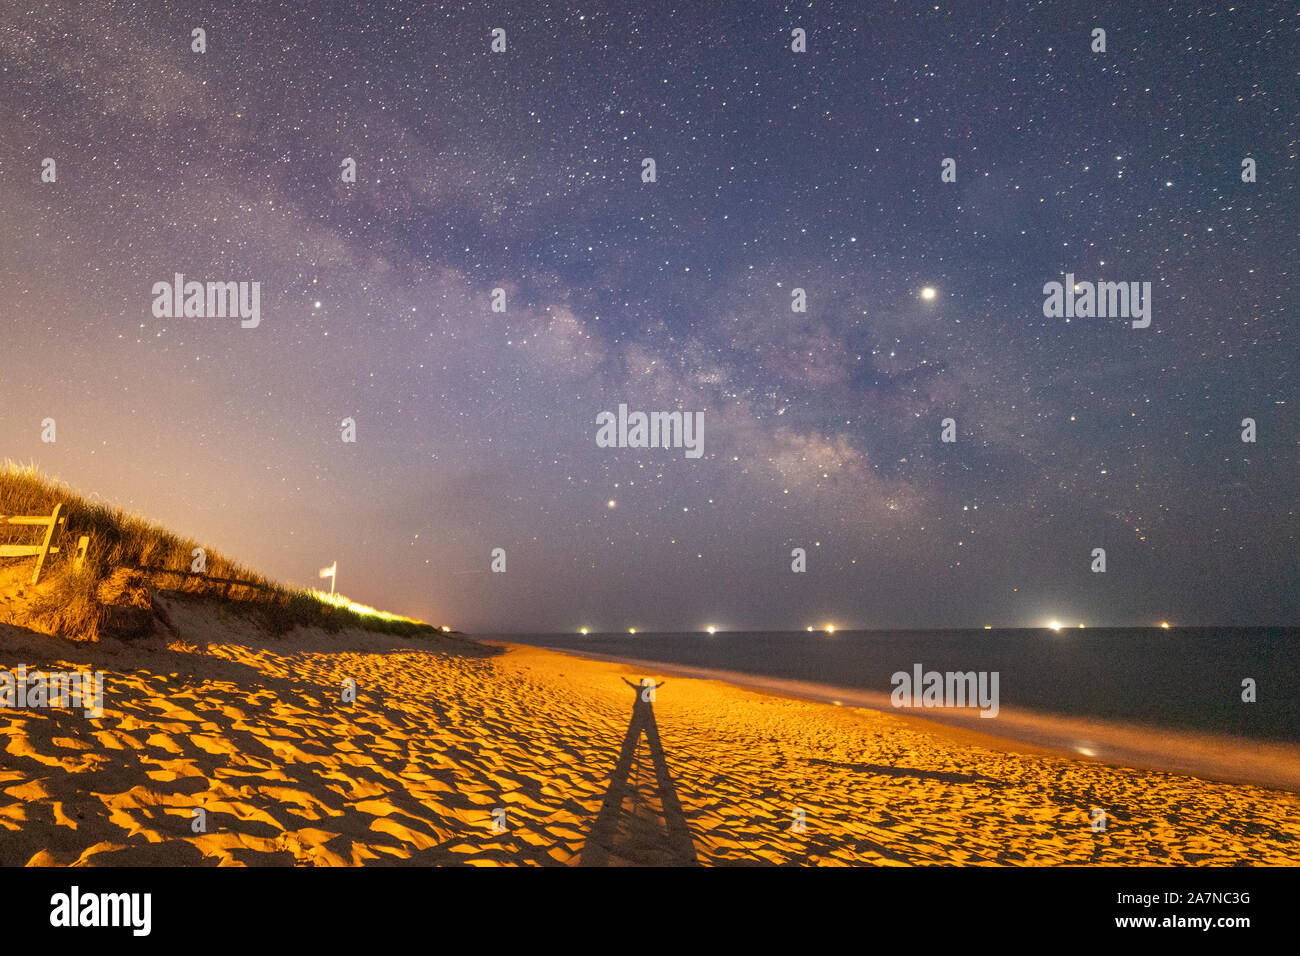 Shadow of a man in the beach sand under the Milky Way galaxy. Stock Photo